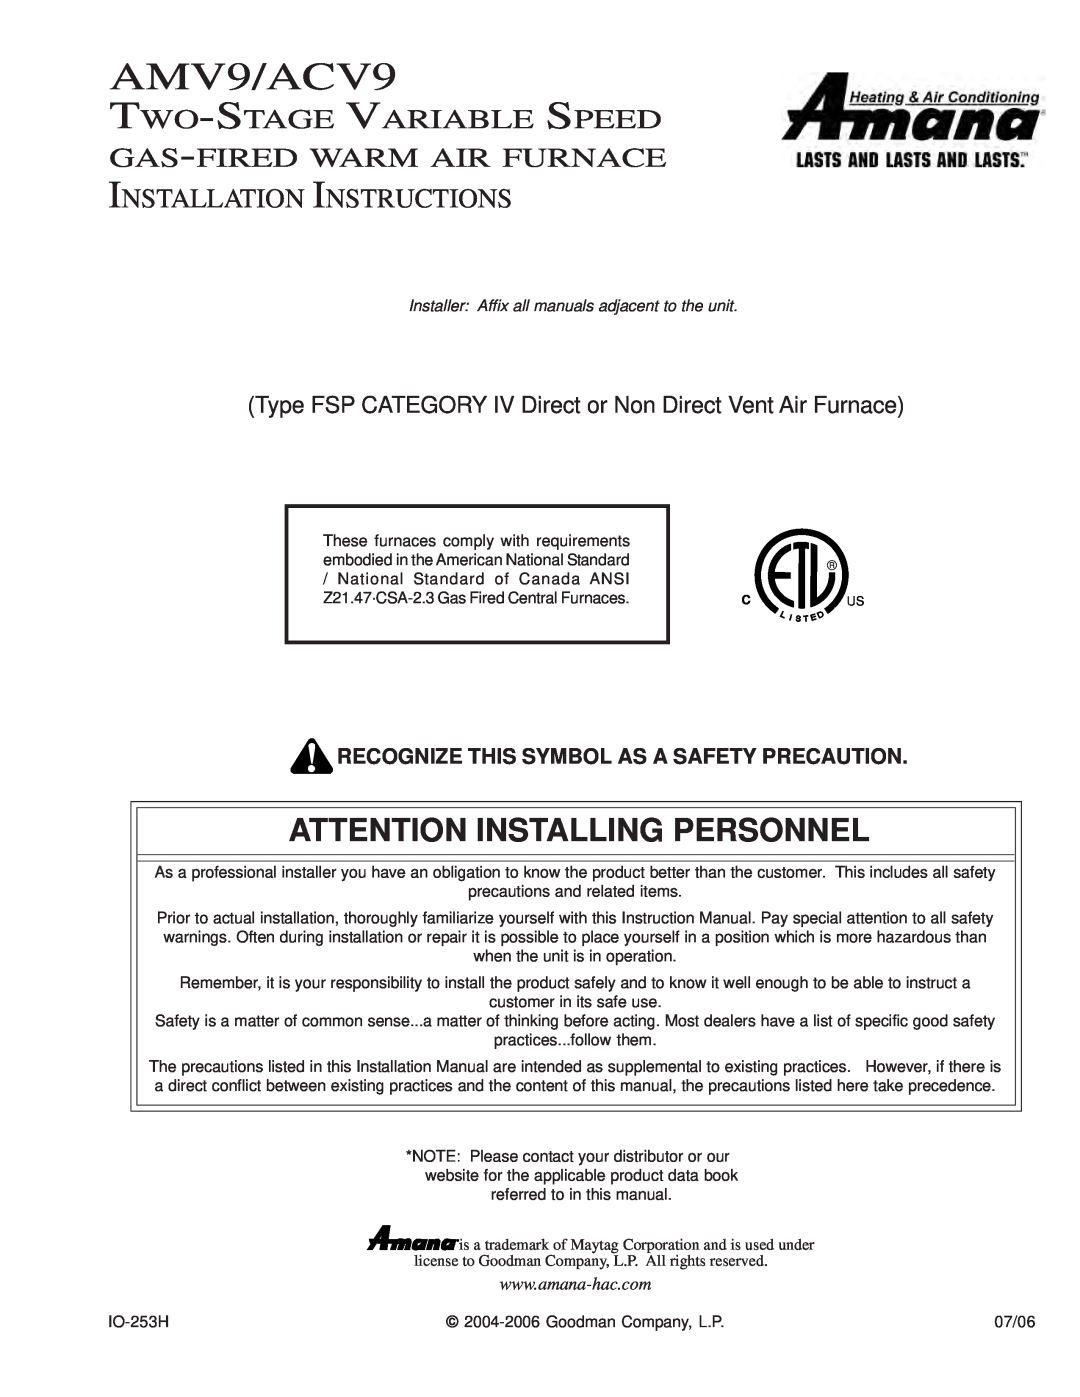 Amana installation instructions Recognize This Symbol As A Safety Precaution, AMV9/ACV9, Attention Installing Personnel 